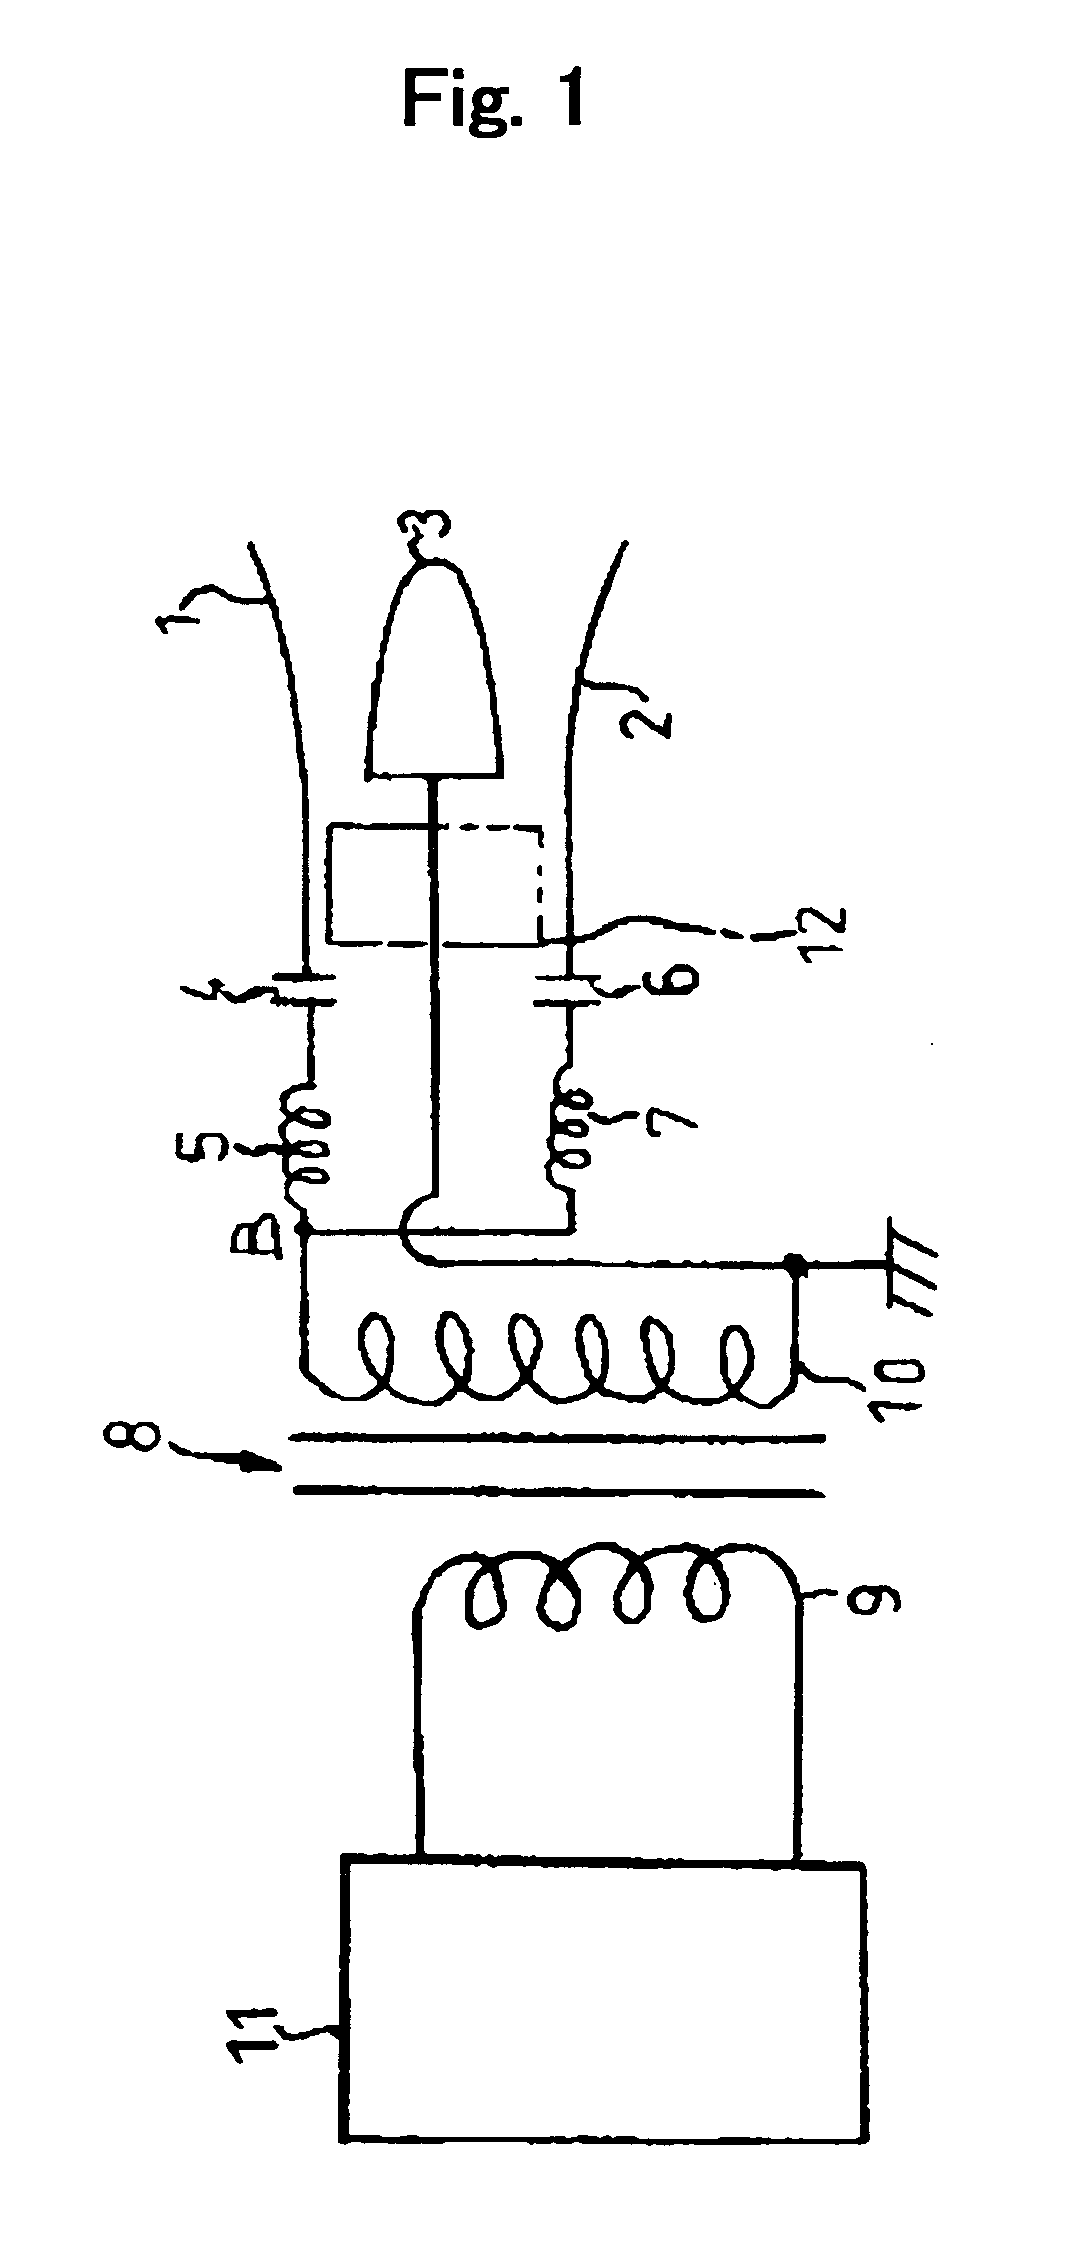 Power supply circuit for plasma generation, plasma generating apparatus, plasma processing apparatus and plasma processed object